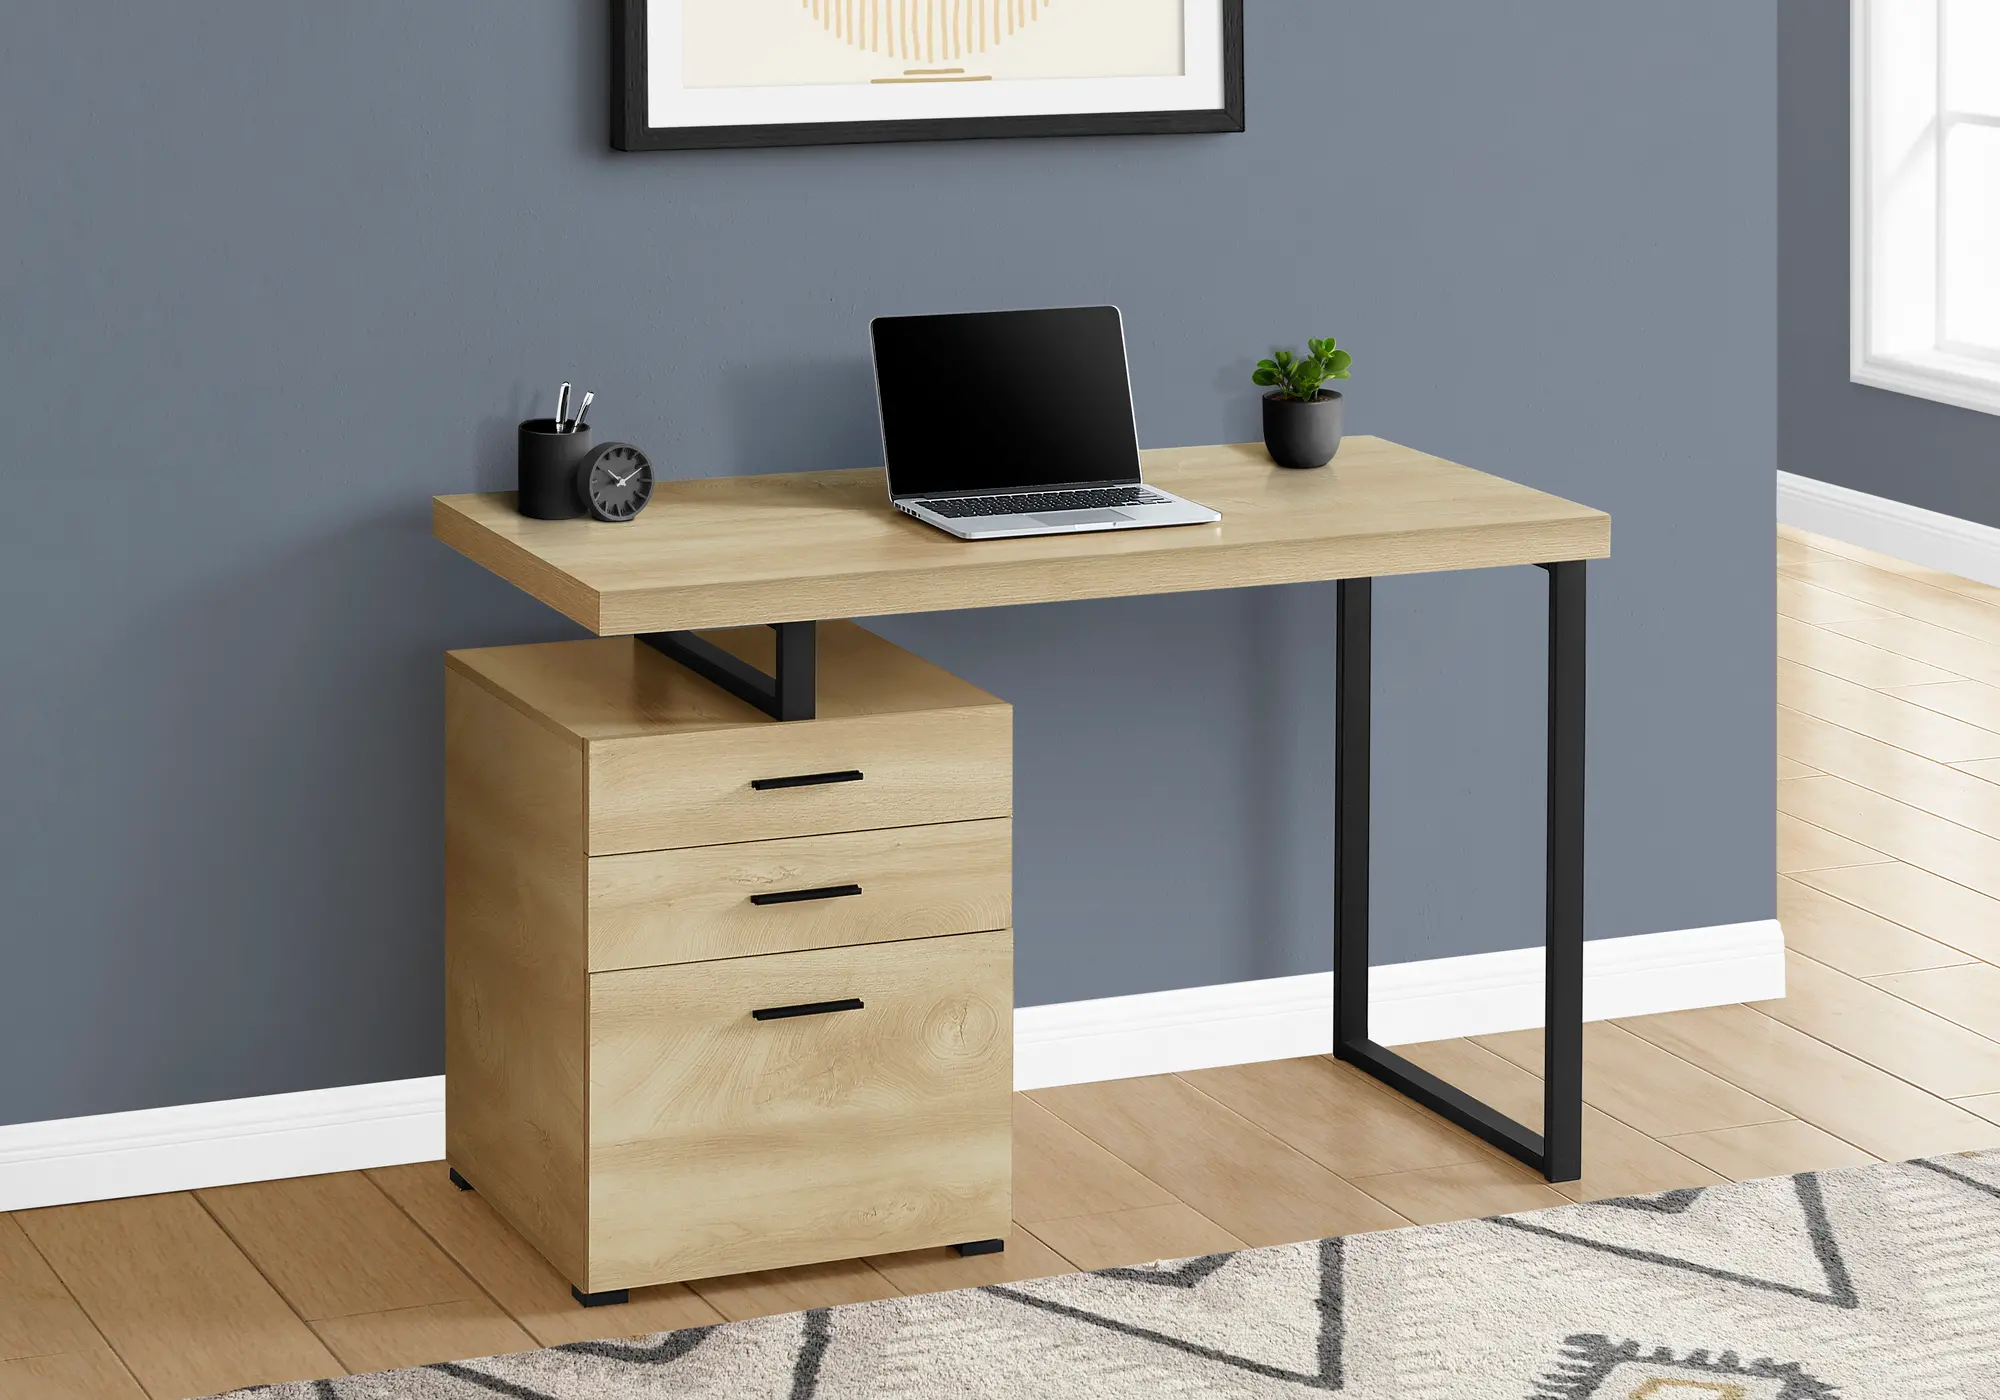 https://static.rcwilley.com/products/112325793/Natural-and-Black-Computer-Desk-rcwilley-image1.webp